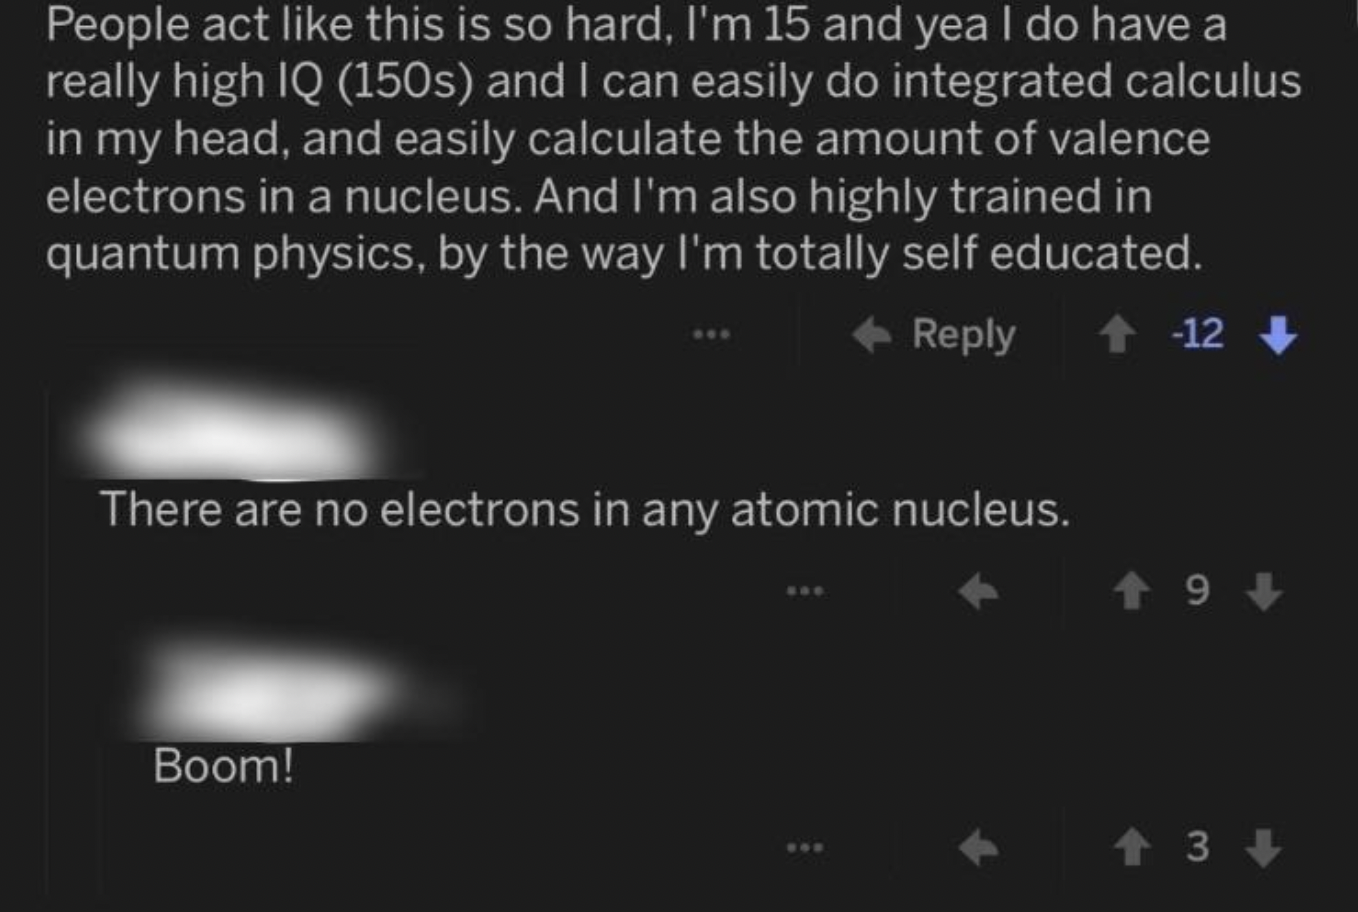 Confidently incorrect people - and I can easily do integrated calculus in my head, and easily calculate the amount of valence electrons in a nucleus. And I'm also highly trained in quantum physics, by the way I'm…